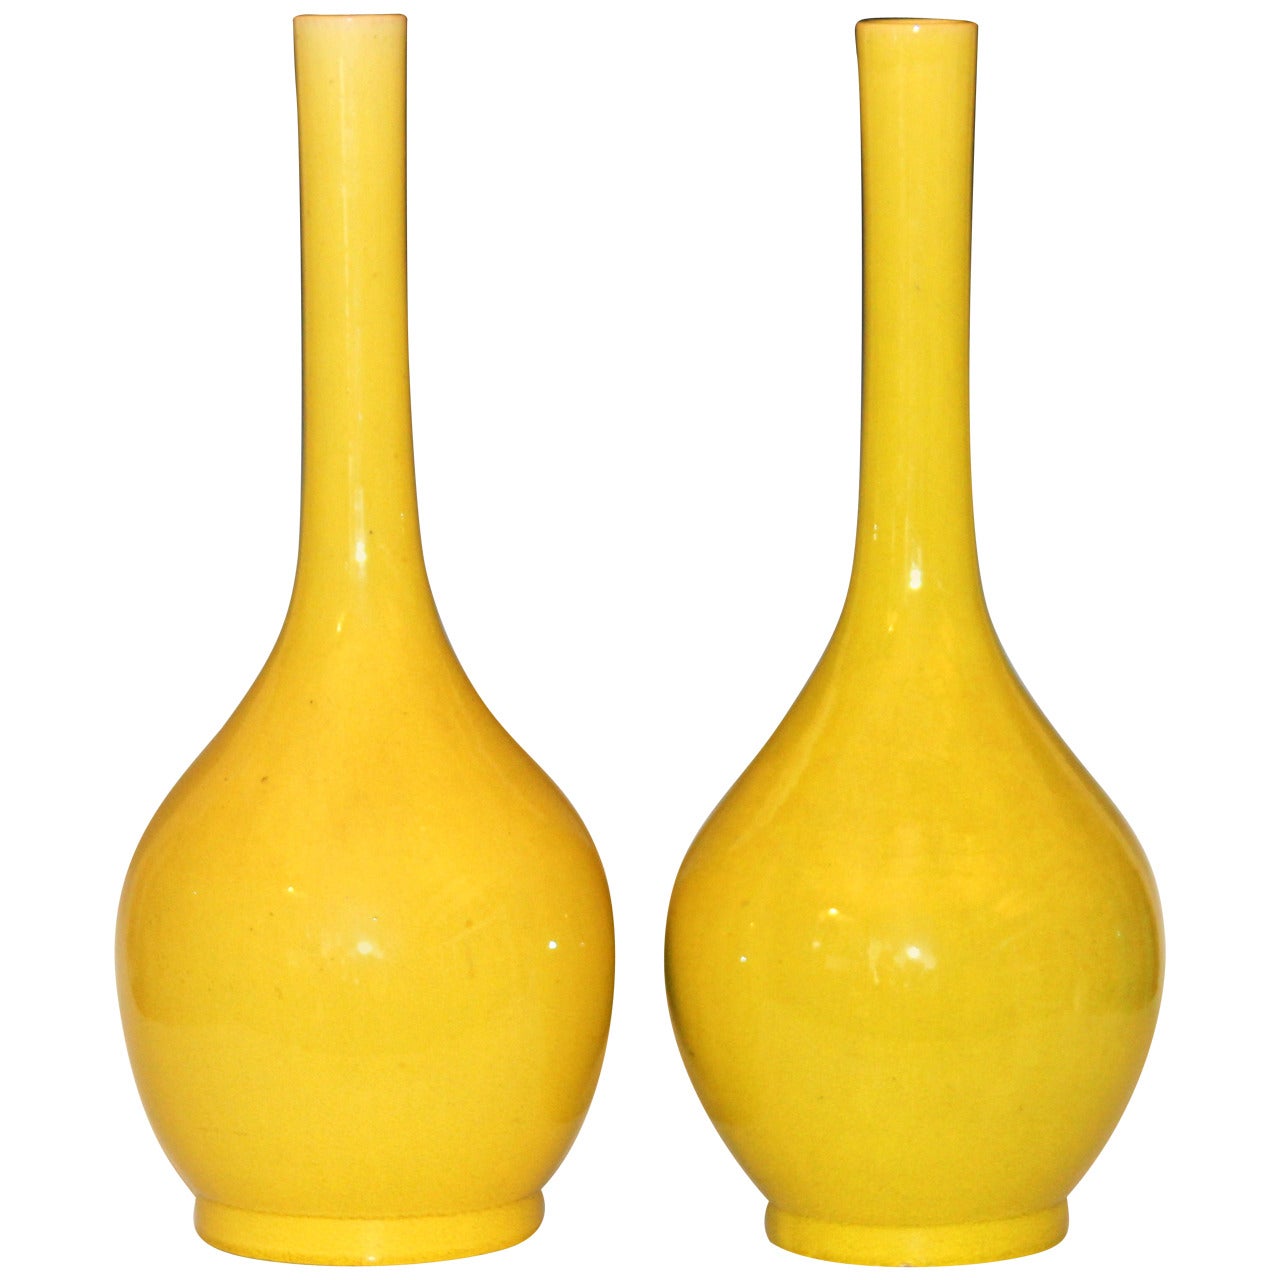 Large Pair of Antique Kyoto Pottery Bottle Vases in Acid Yellow Crackle Glaze